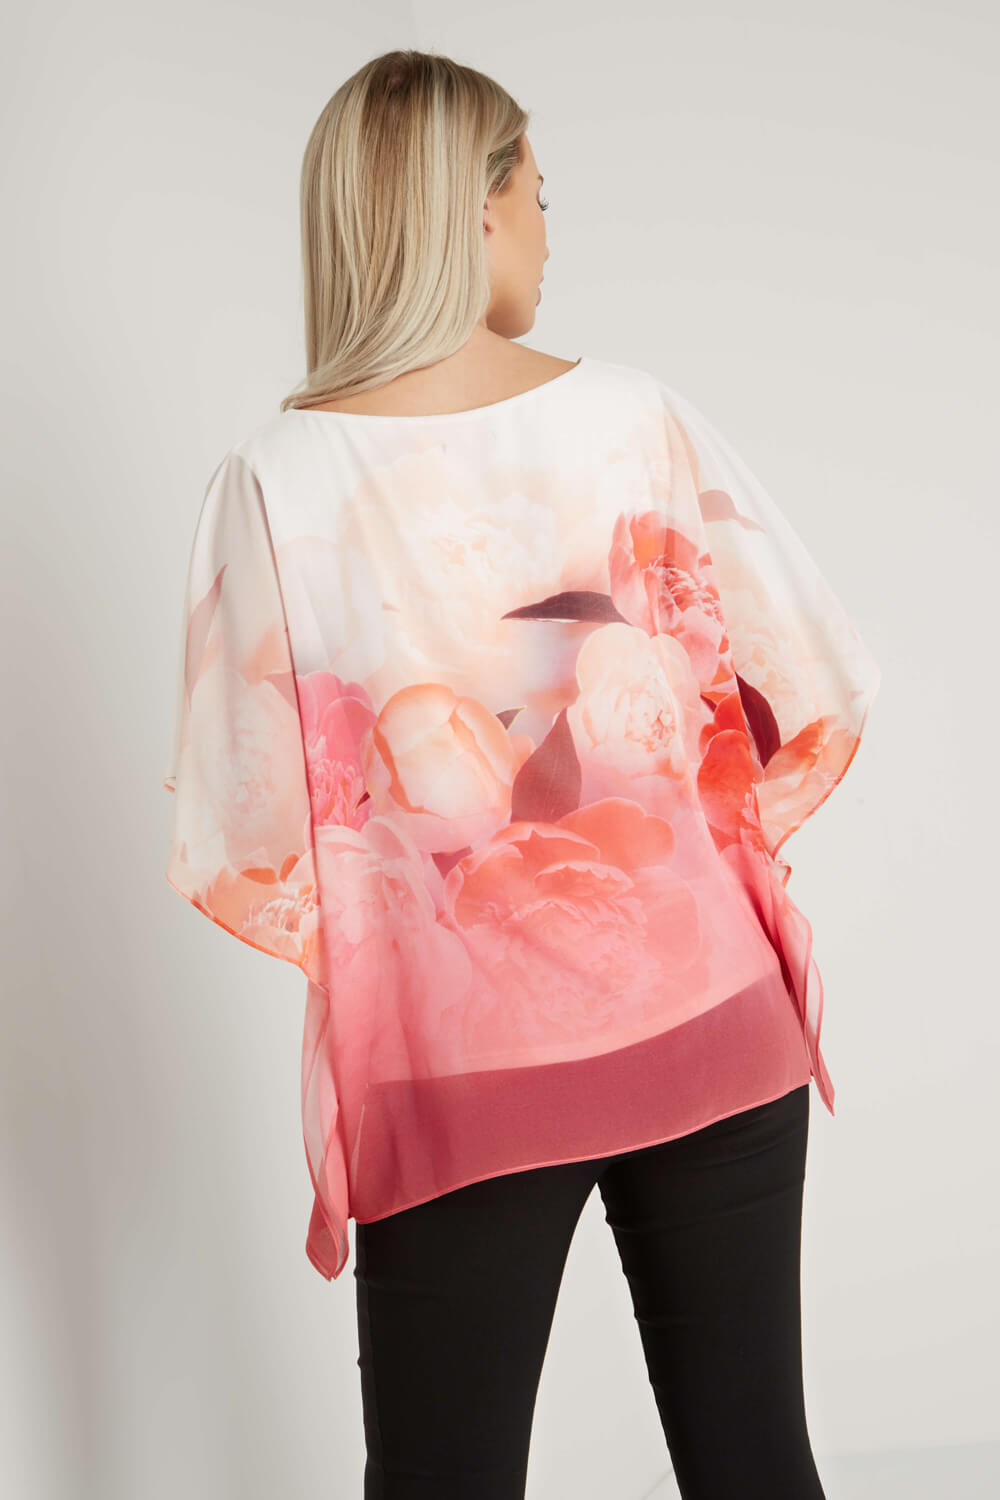 PINK Floral Chiffon Overlay Top, Image 2 of 3